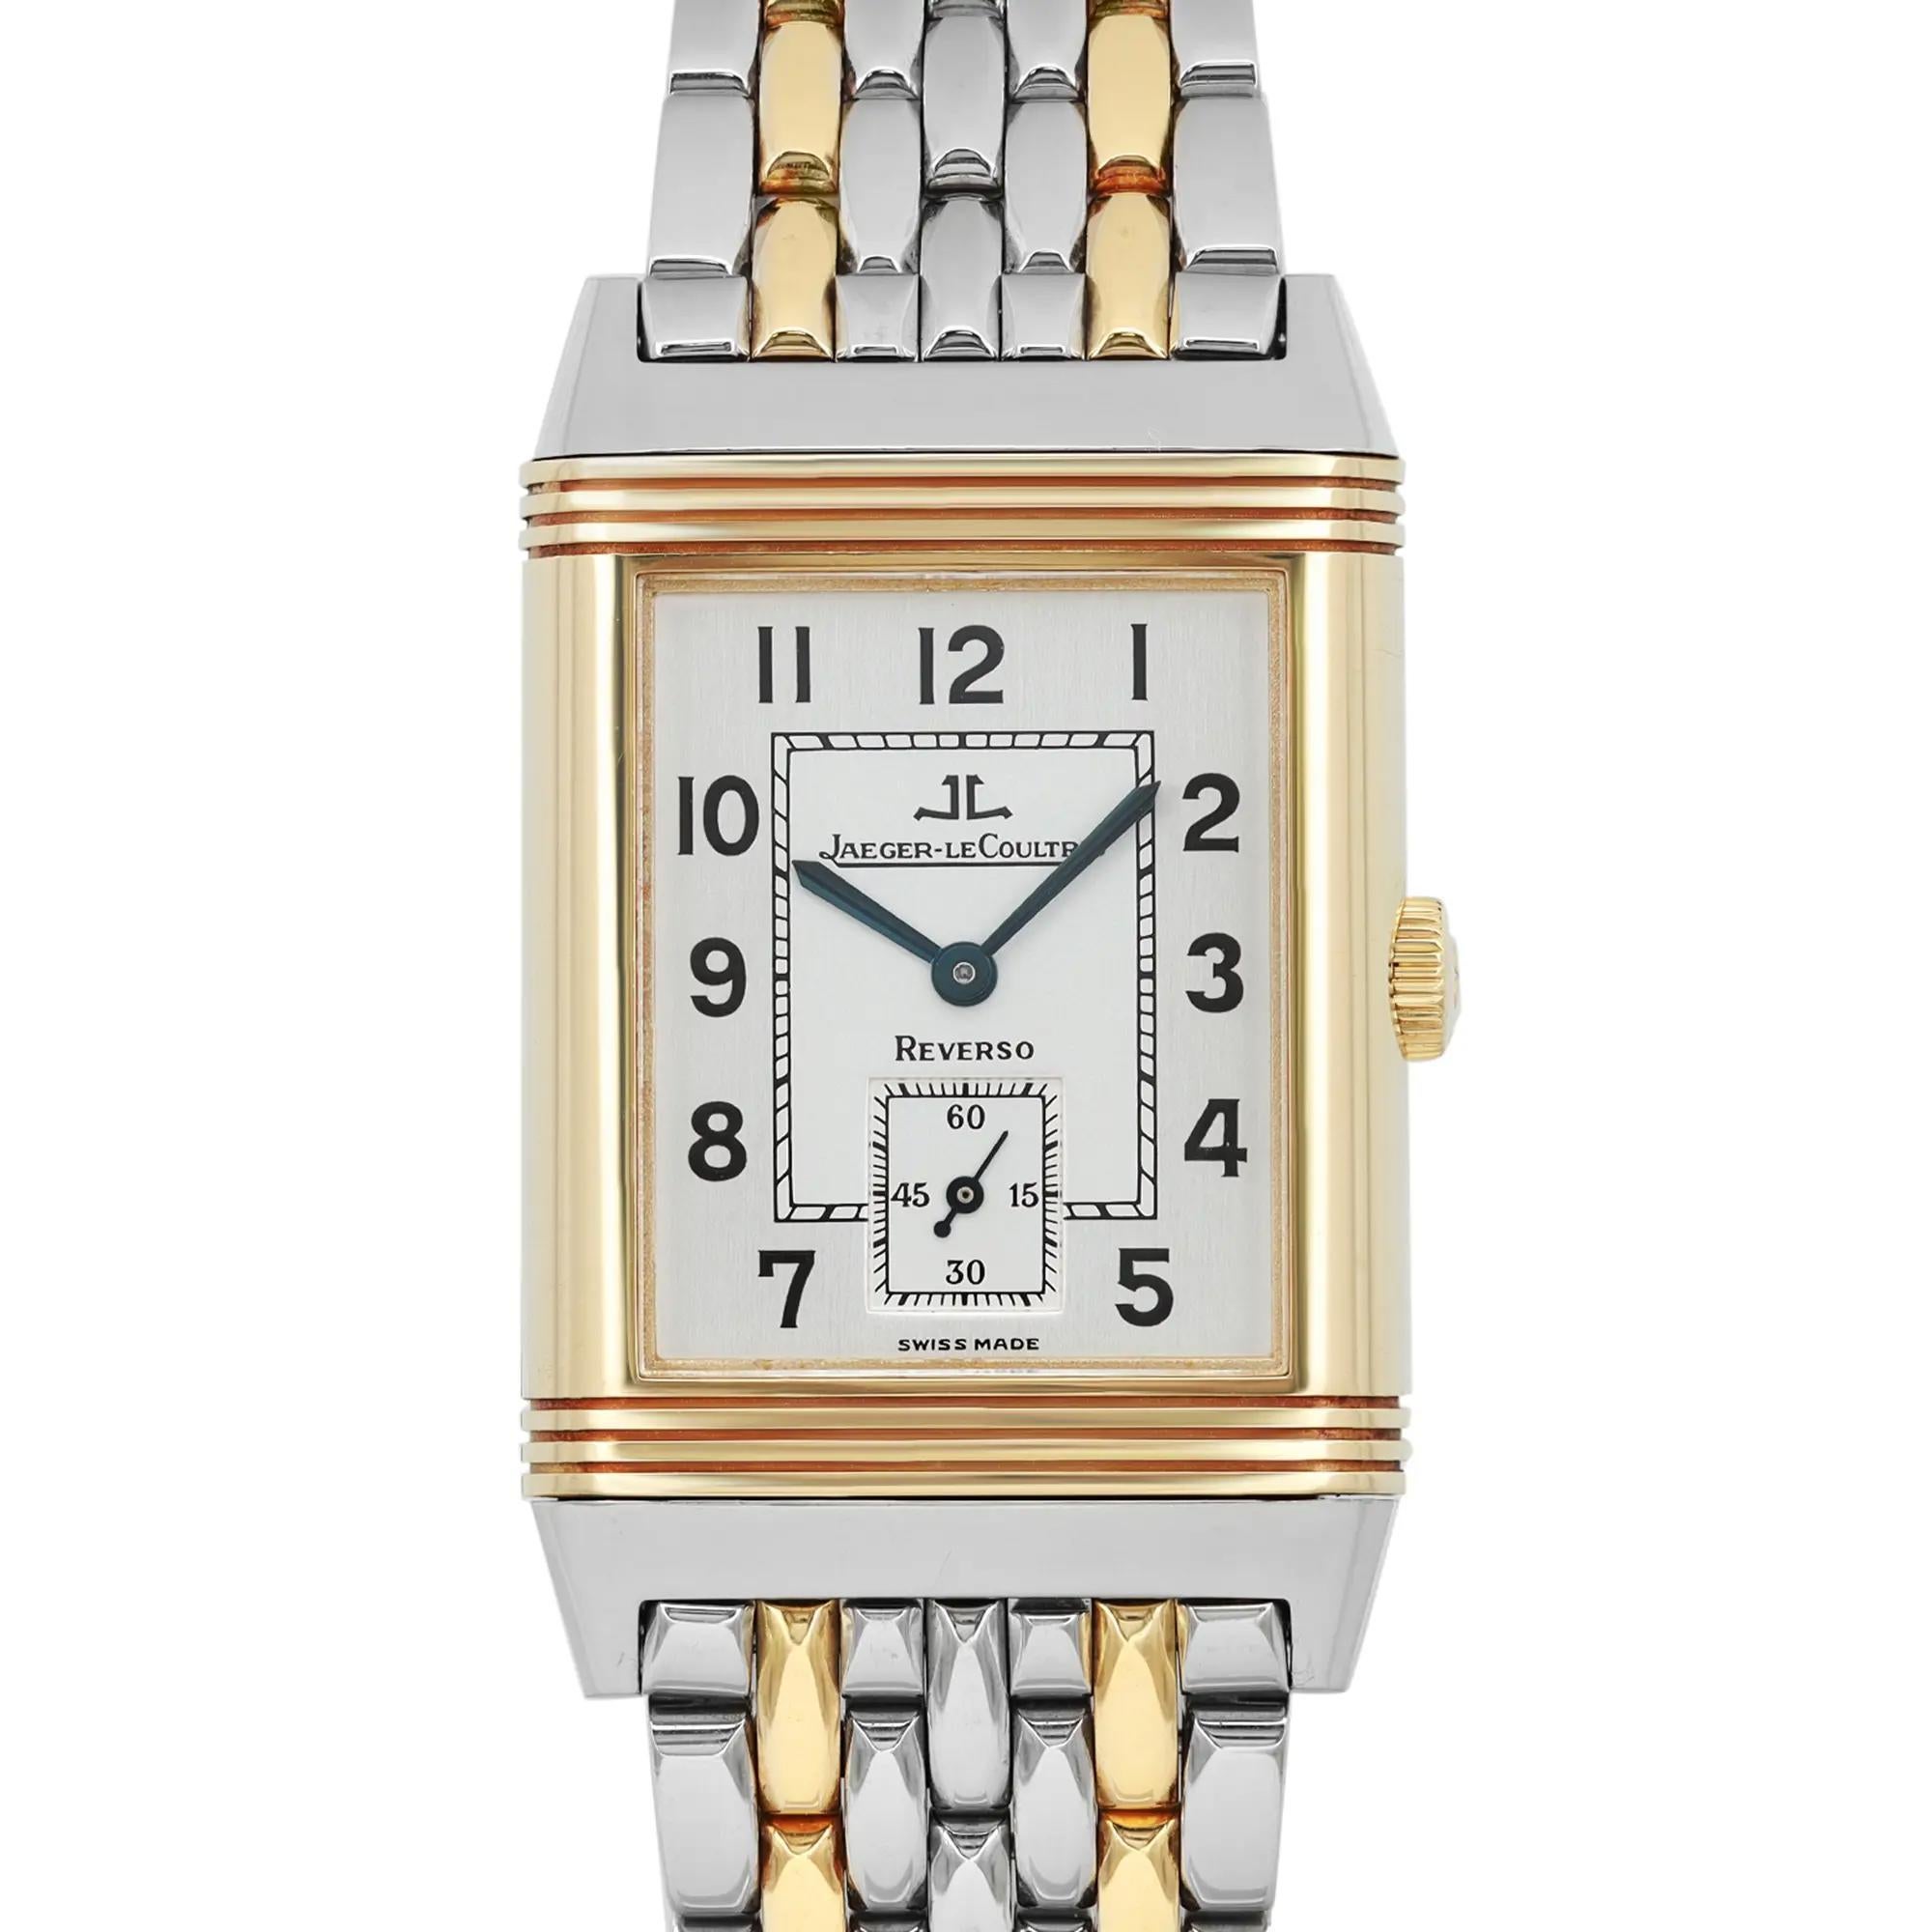 Pre-owned. Good condition. Comes with a gift box.

Brand: Jaeger-LeCoultre
Model Number: 270.5.62
Department: Men
Country/Region of Manufacture: Switzerland
Style: Luxury
Model Name: Jaeger-LeCoultre Reverso Grande Taille
Vintage: No
Movement:
Type: